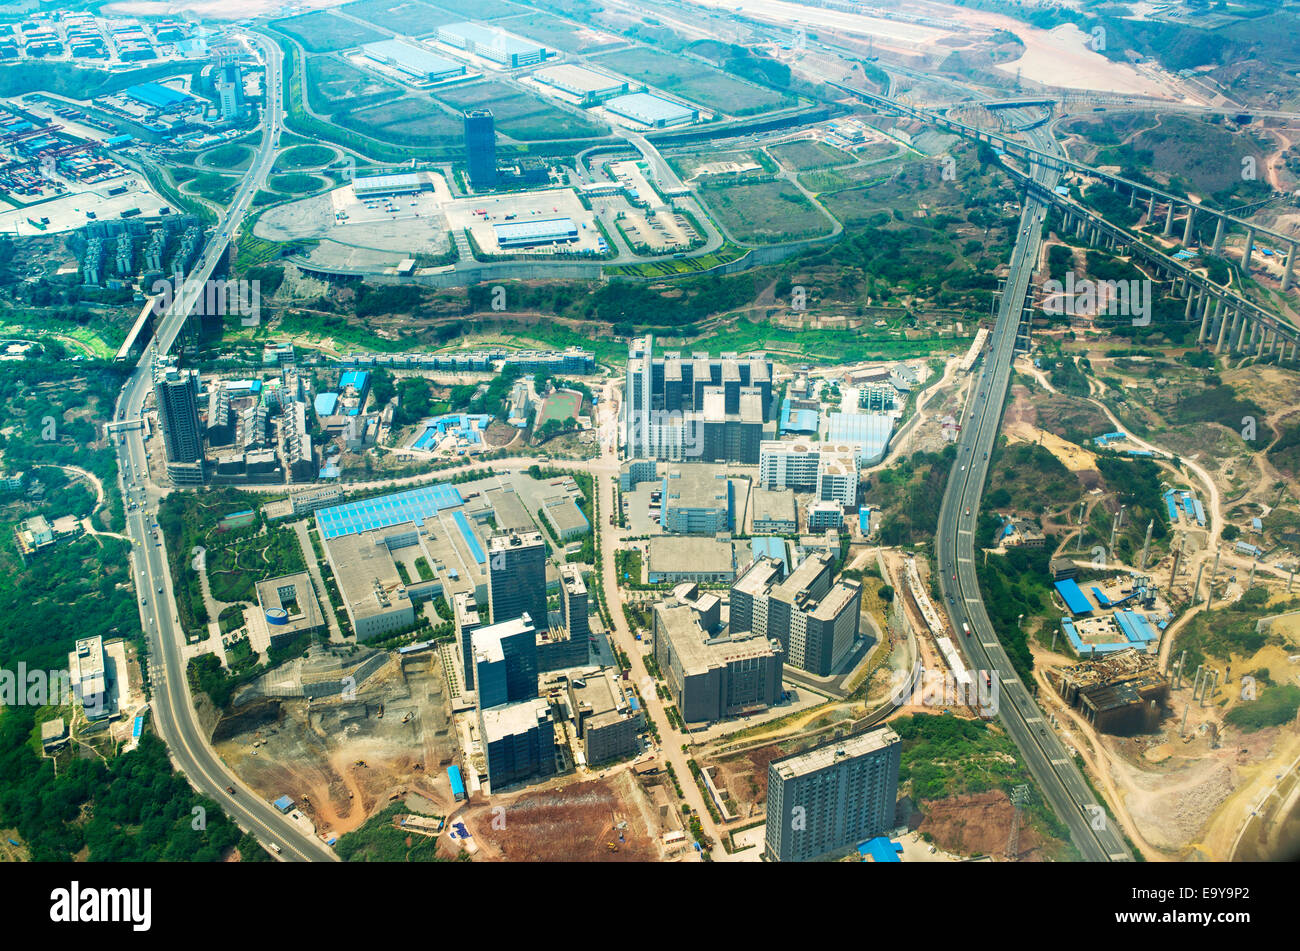 Overlooking the Two Rivers Area Industrial Park in Chongqing Stock Photo